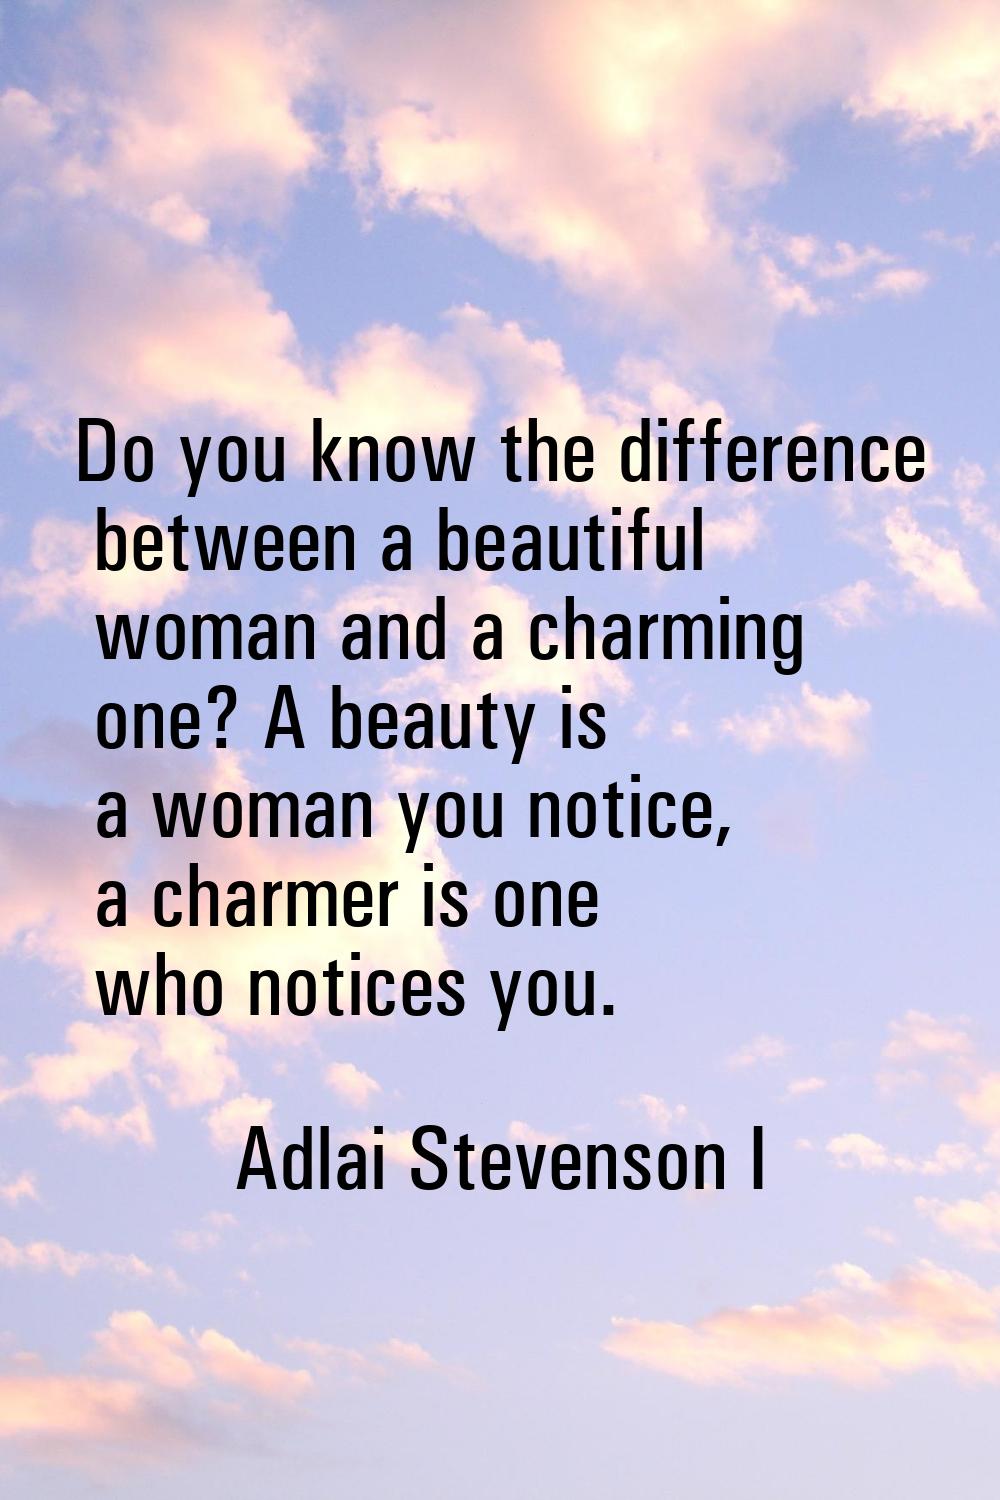 Do you know the difference between a beautiful woman and a charming one? A beauty is a woman you no